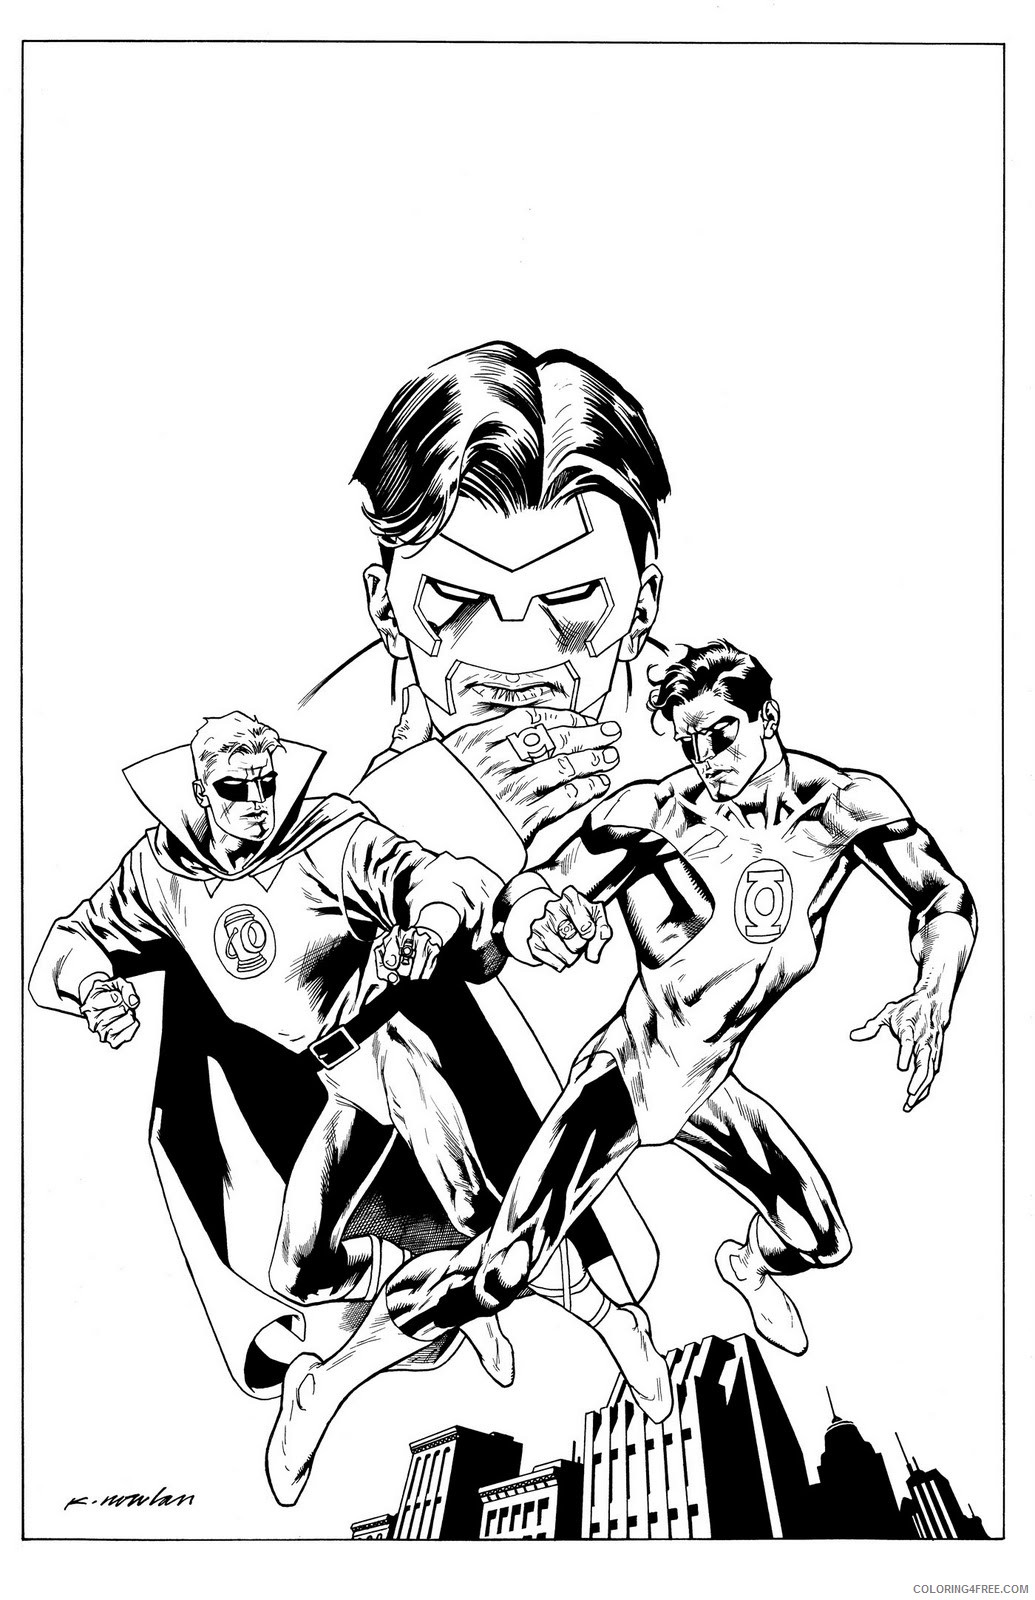 dc comics green lantern coloring pages to print Coloring4free